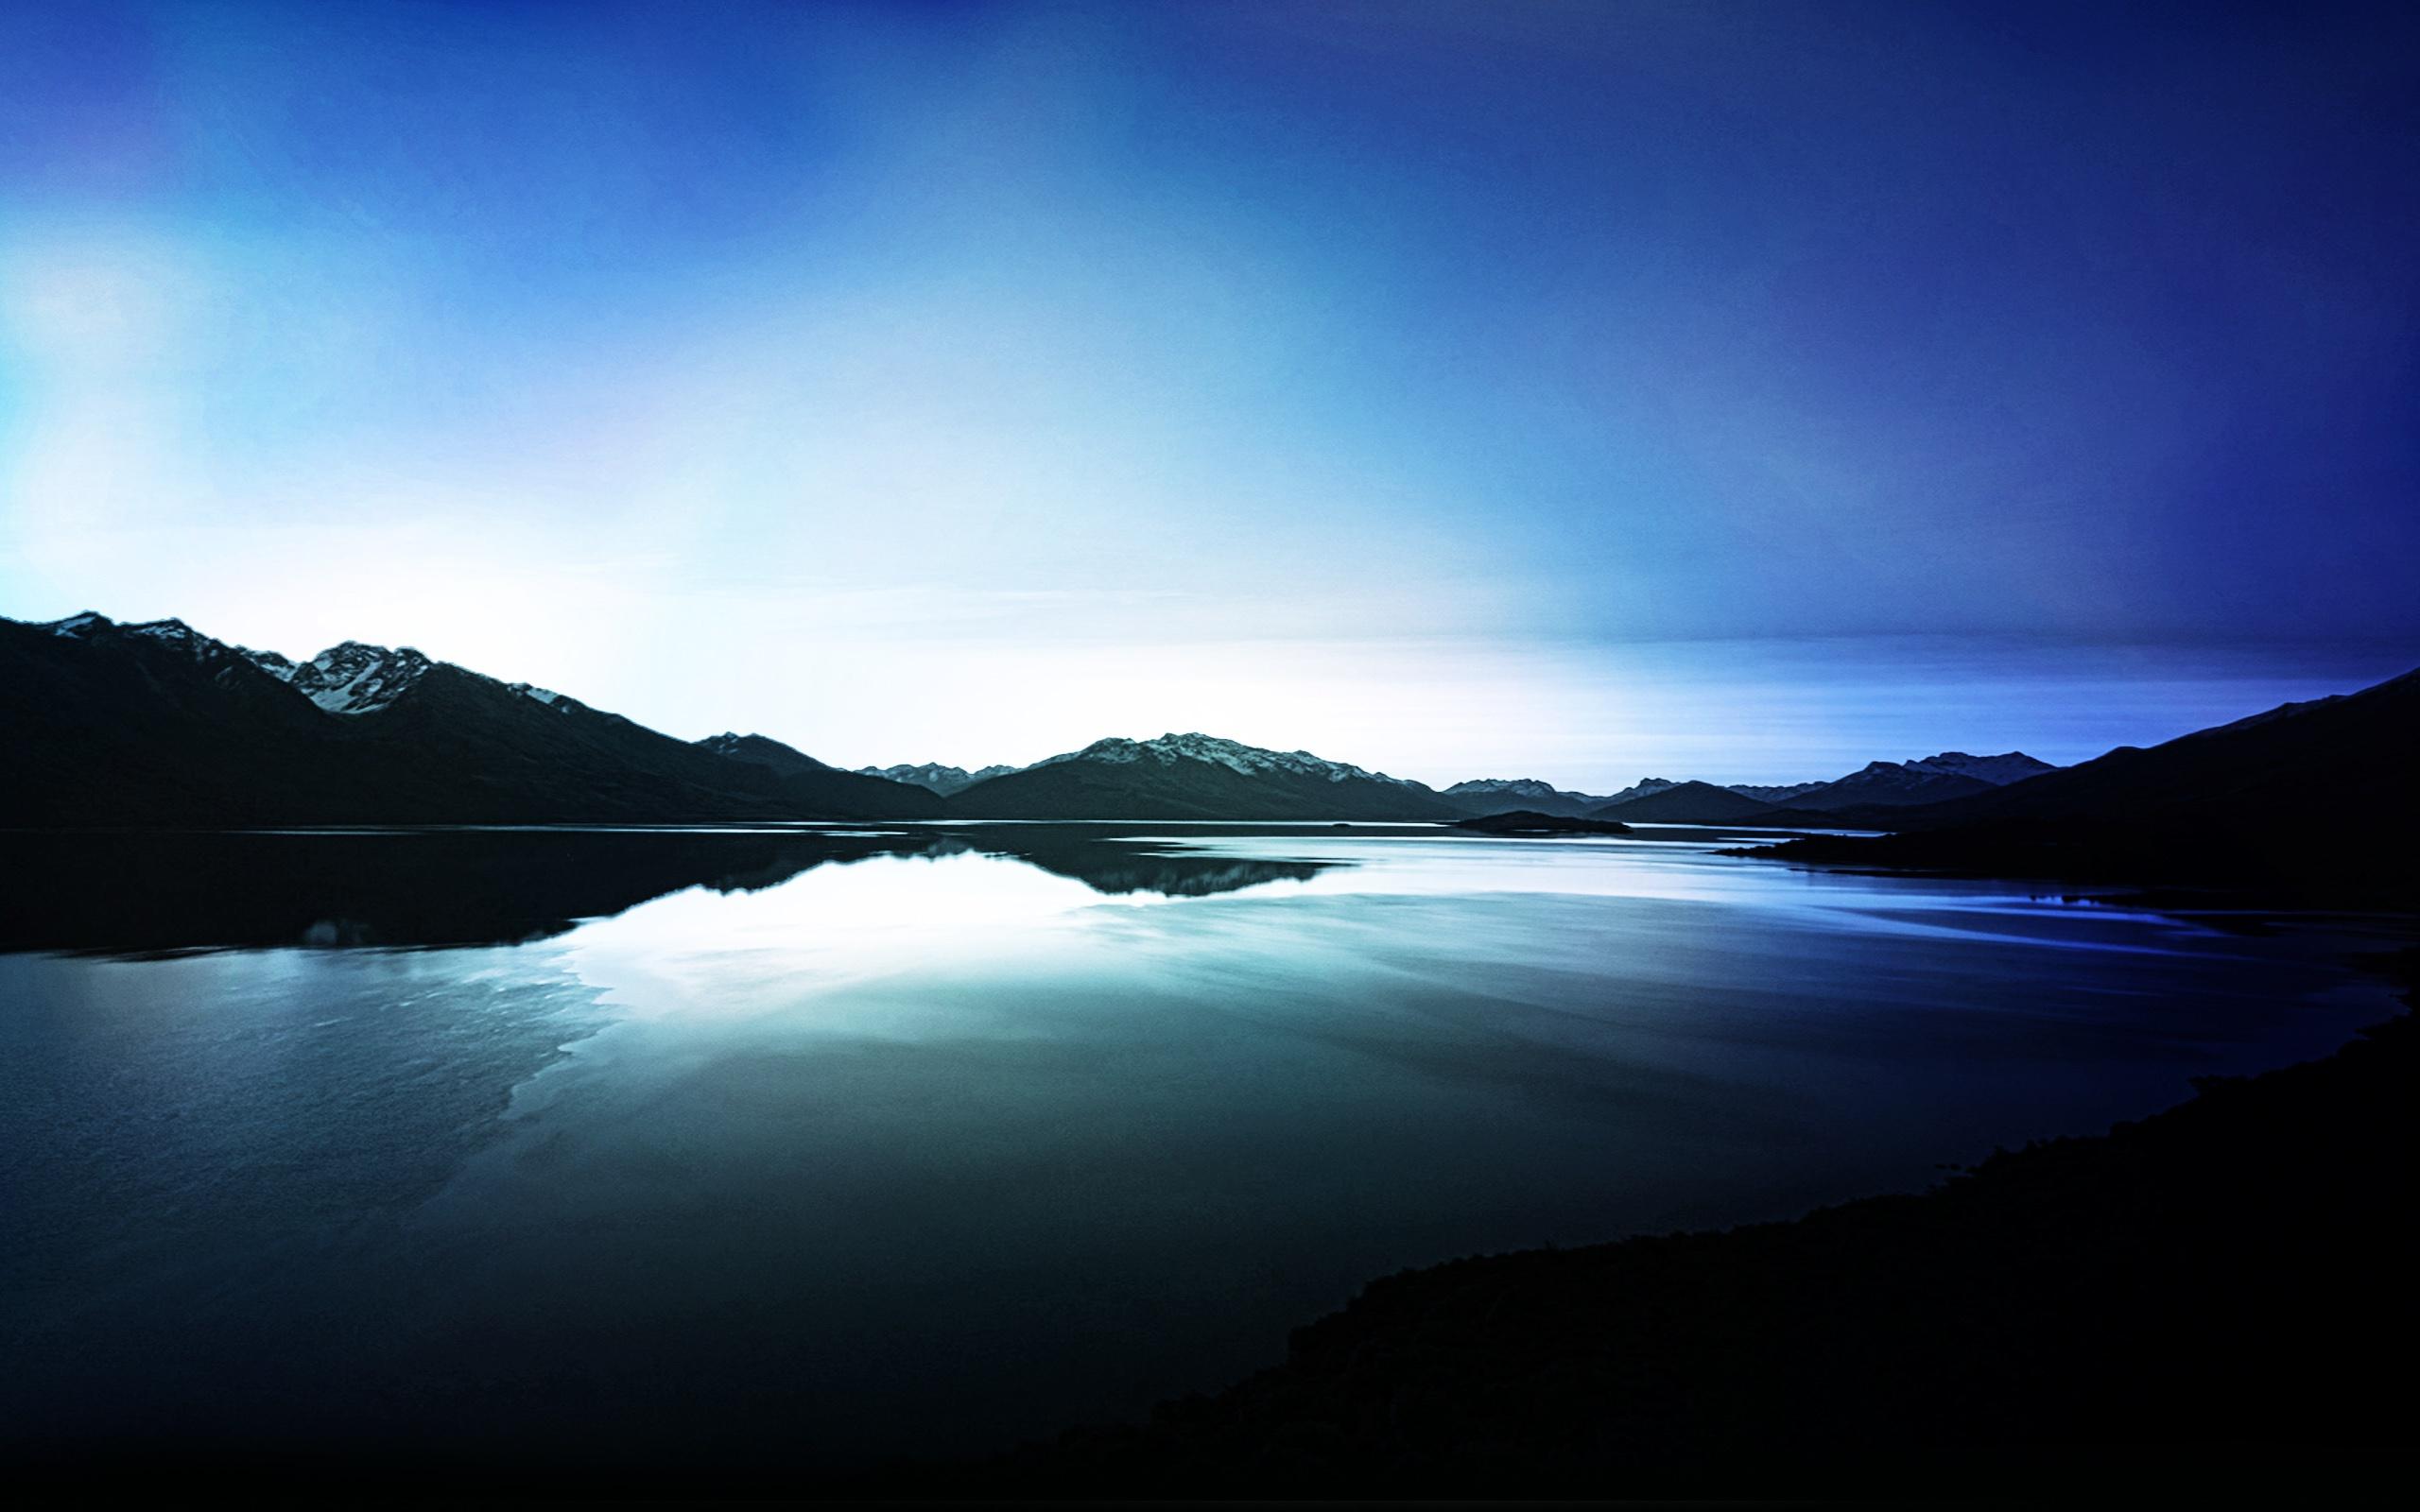 Dark Lake View Reflections Wallpaper in jpg format for free download